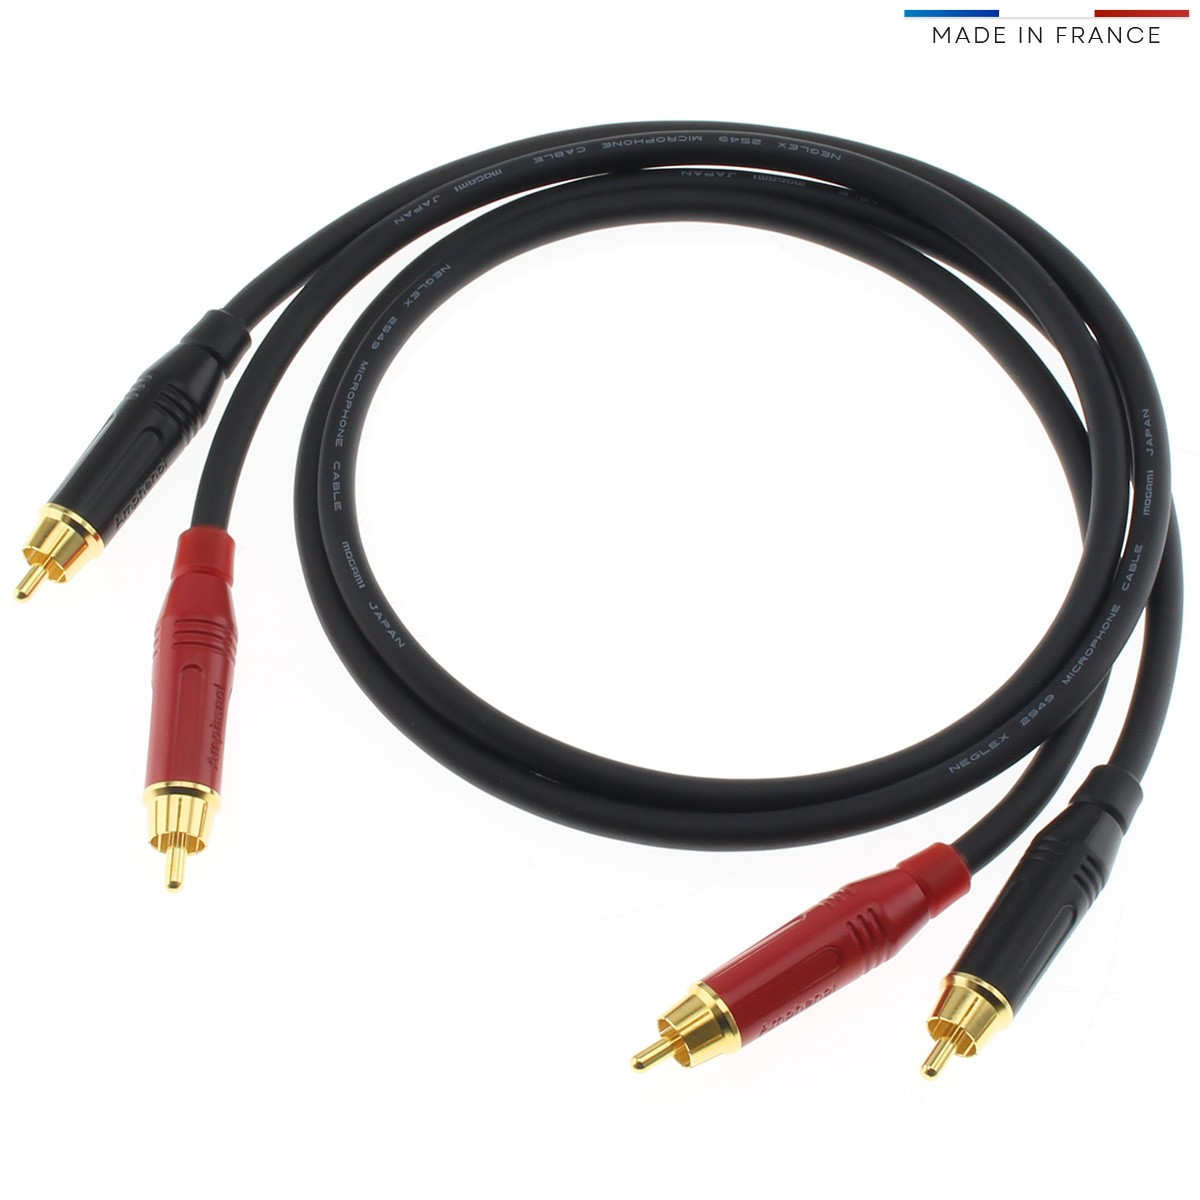 AUDIOPHONICS WIRE Interconnect Cable Stereo RCA OFC Copper Gold Plated 75cm